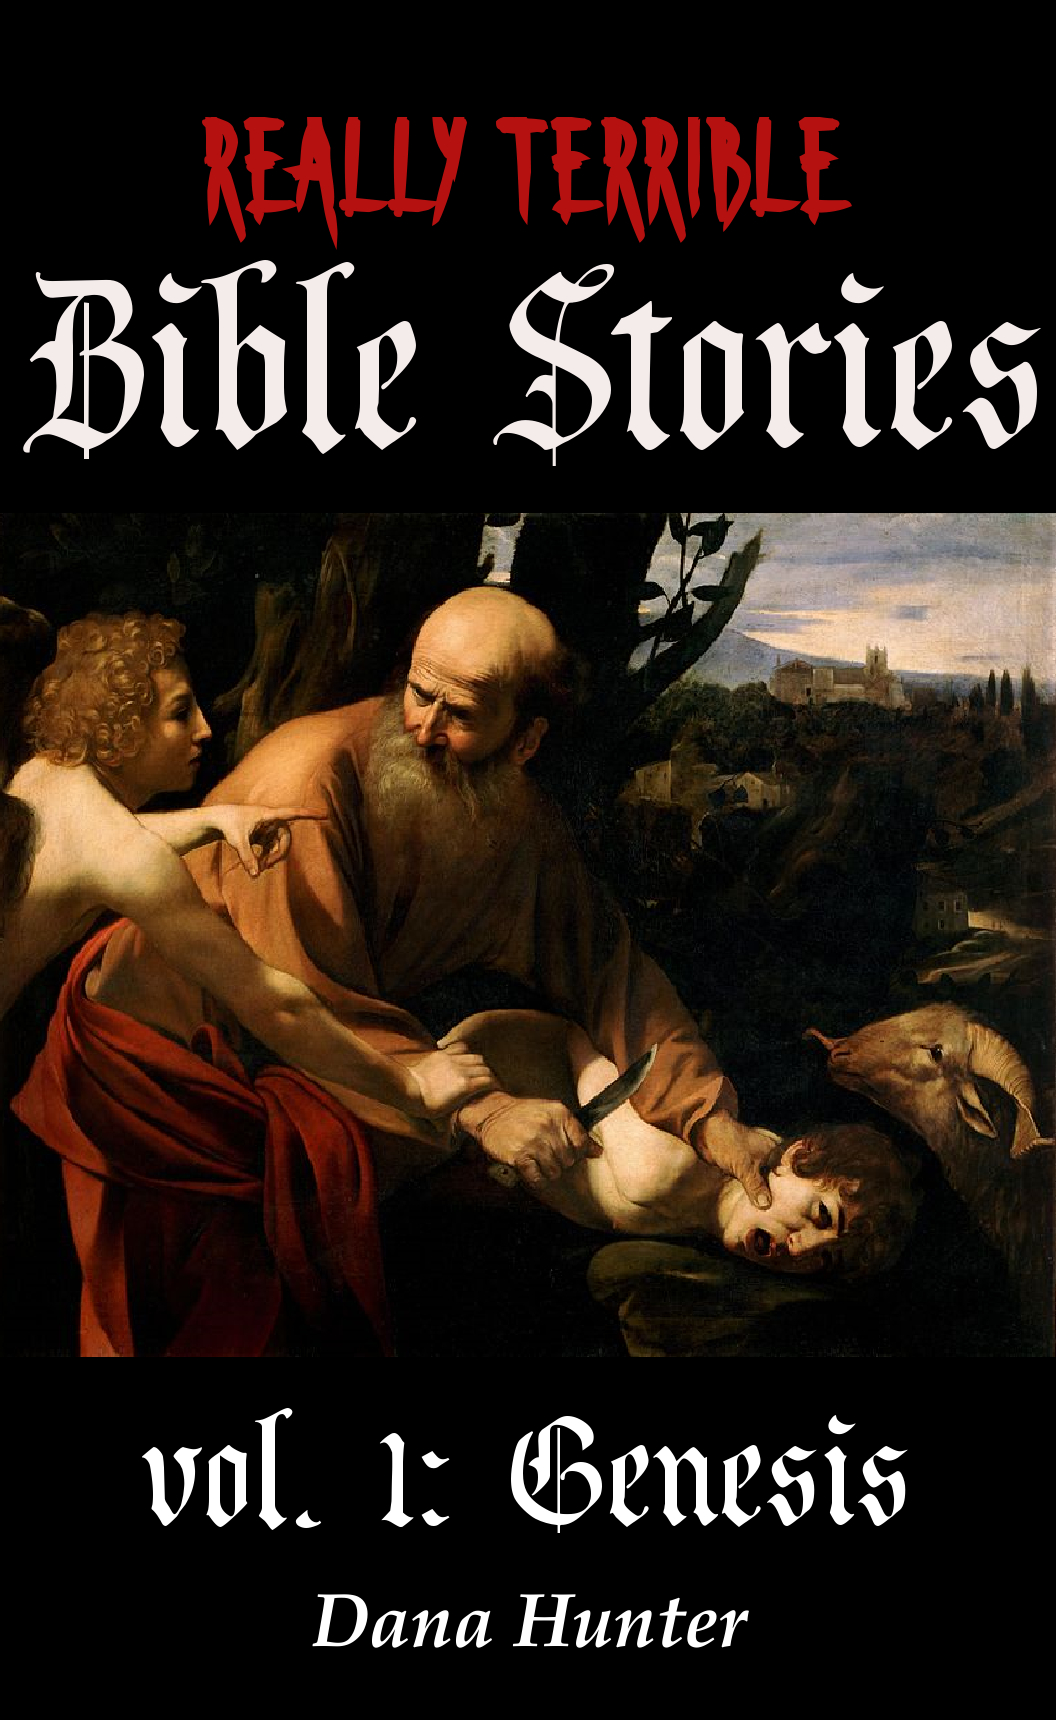 Image is a painting of Abraham, holding a knife to a screaming Isaac's throat, looking incomprehendingly at the cherub that's trying to get his attention. Above is the title Really Terrible Bible Stories. Below is vol. I Genesis, Dana Hunter.